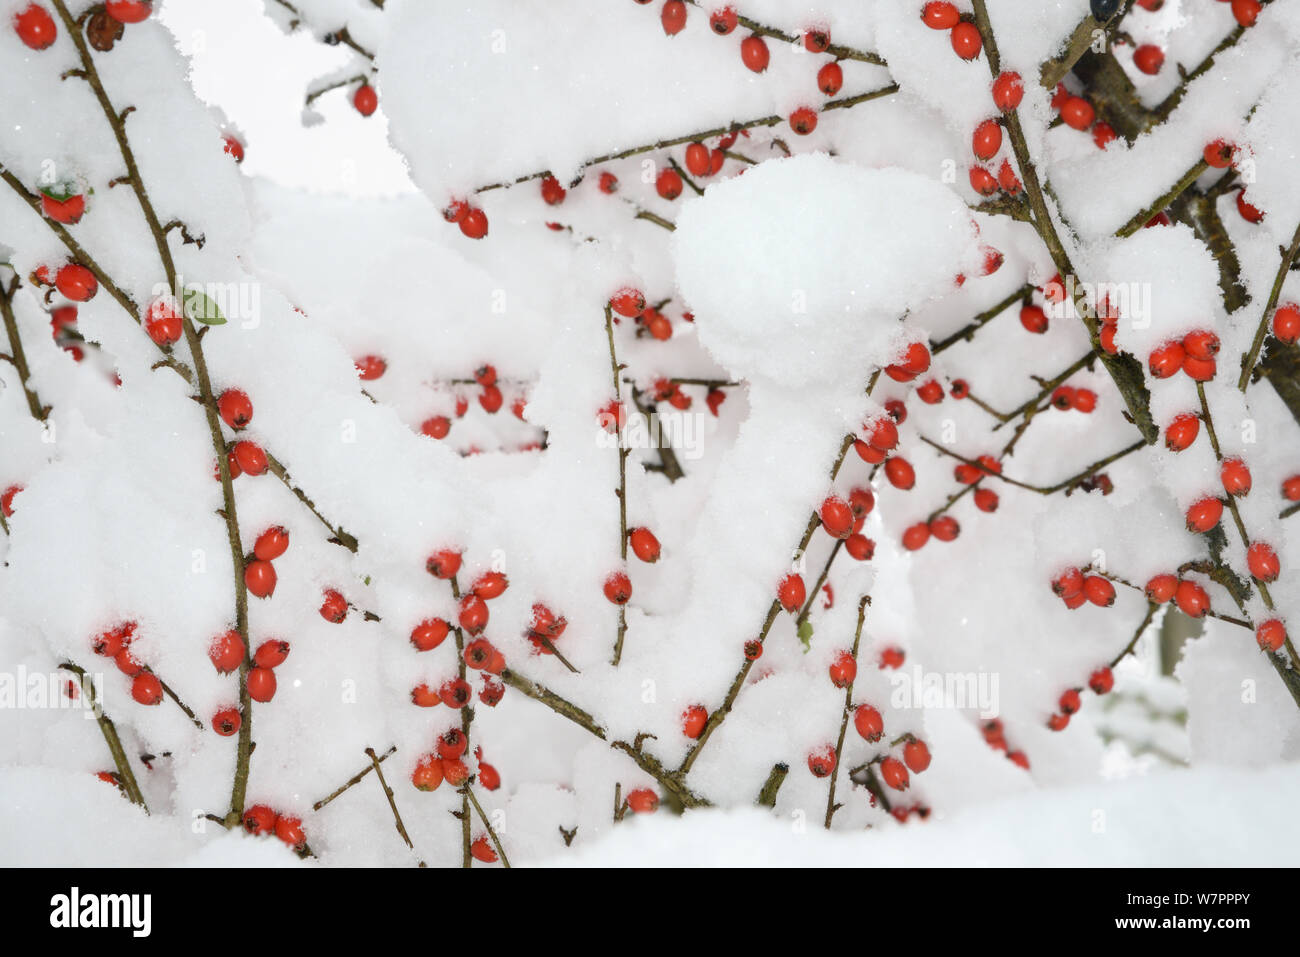 Red Cotoneaster (Cotoneaster) berries covered in thick snow in garden, Wiltshire, UK, January 2013 Stock Photo